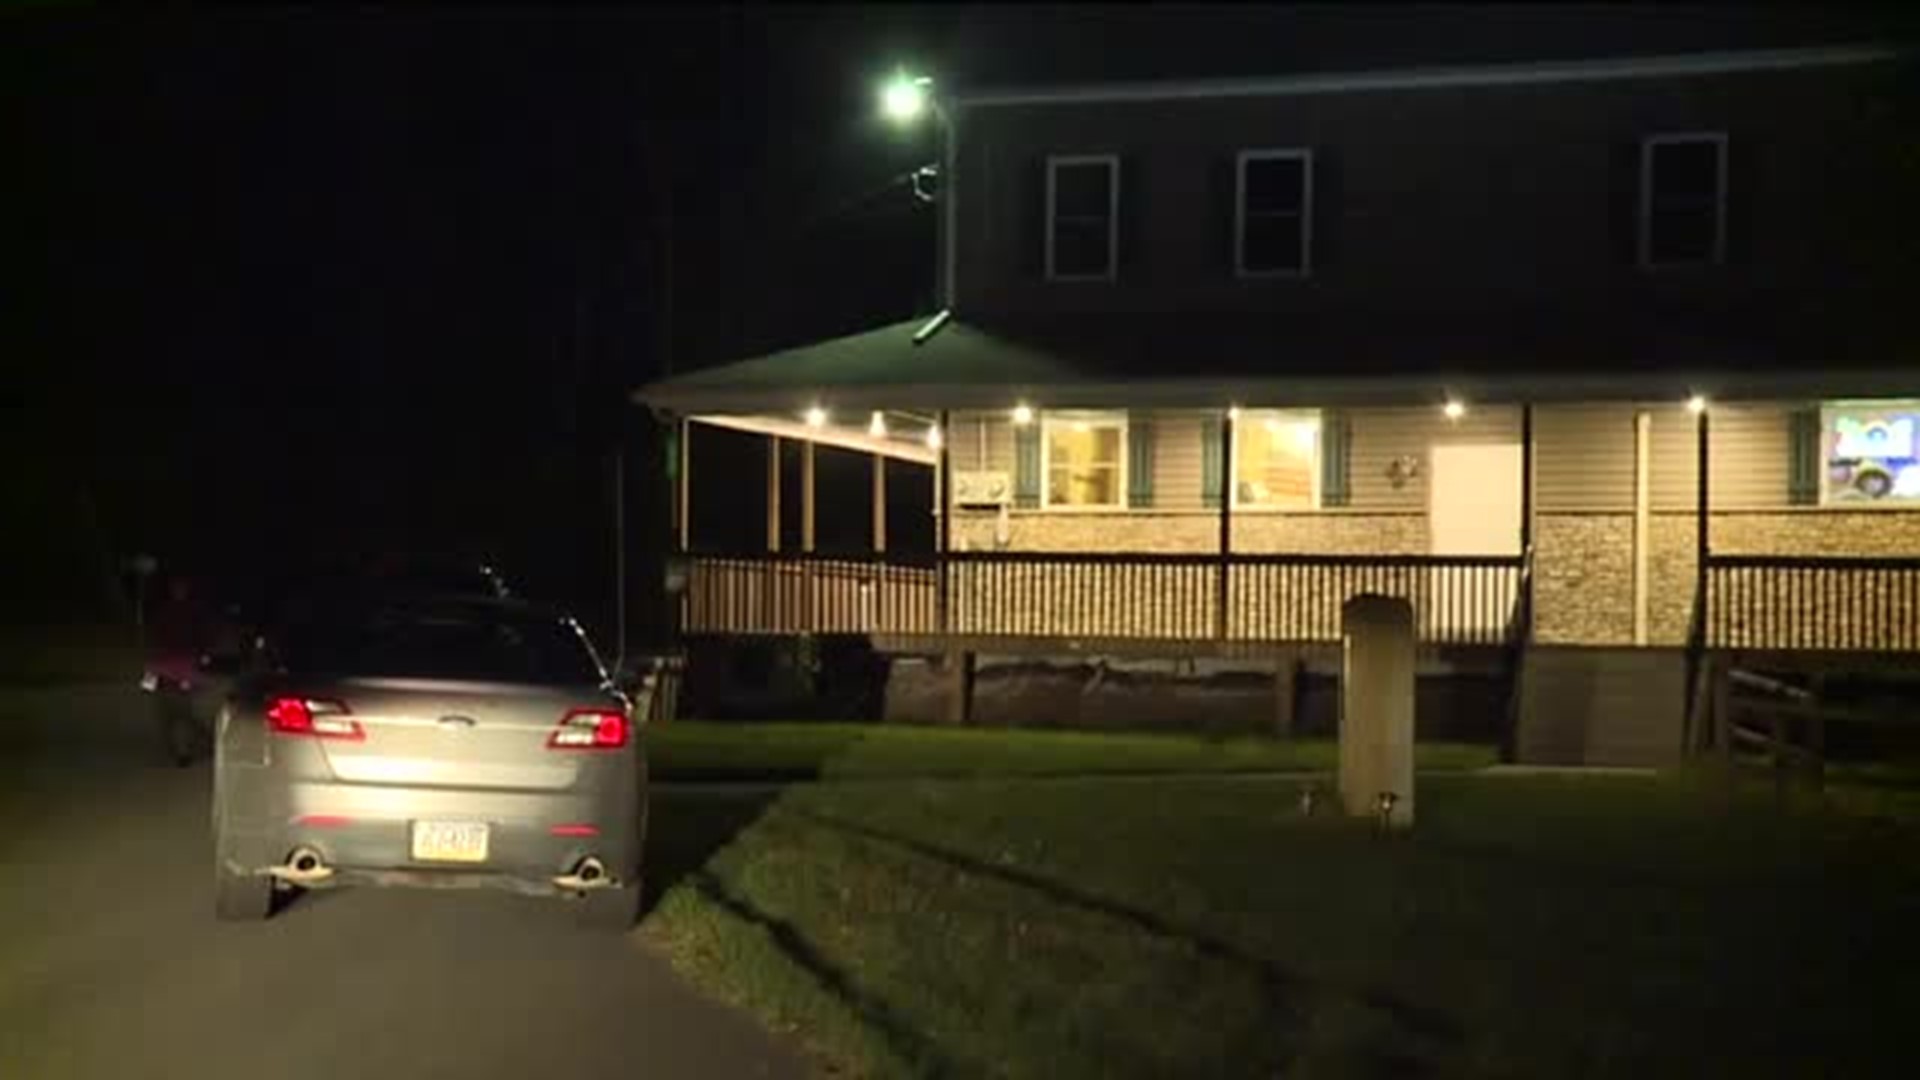 Police: Suspect in Schuylkill County Shooting Tried to Kill His Wife